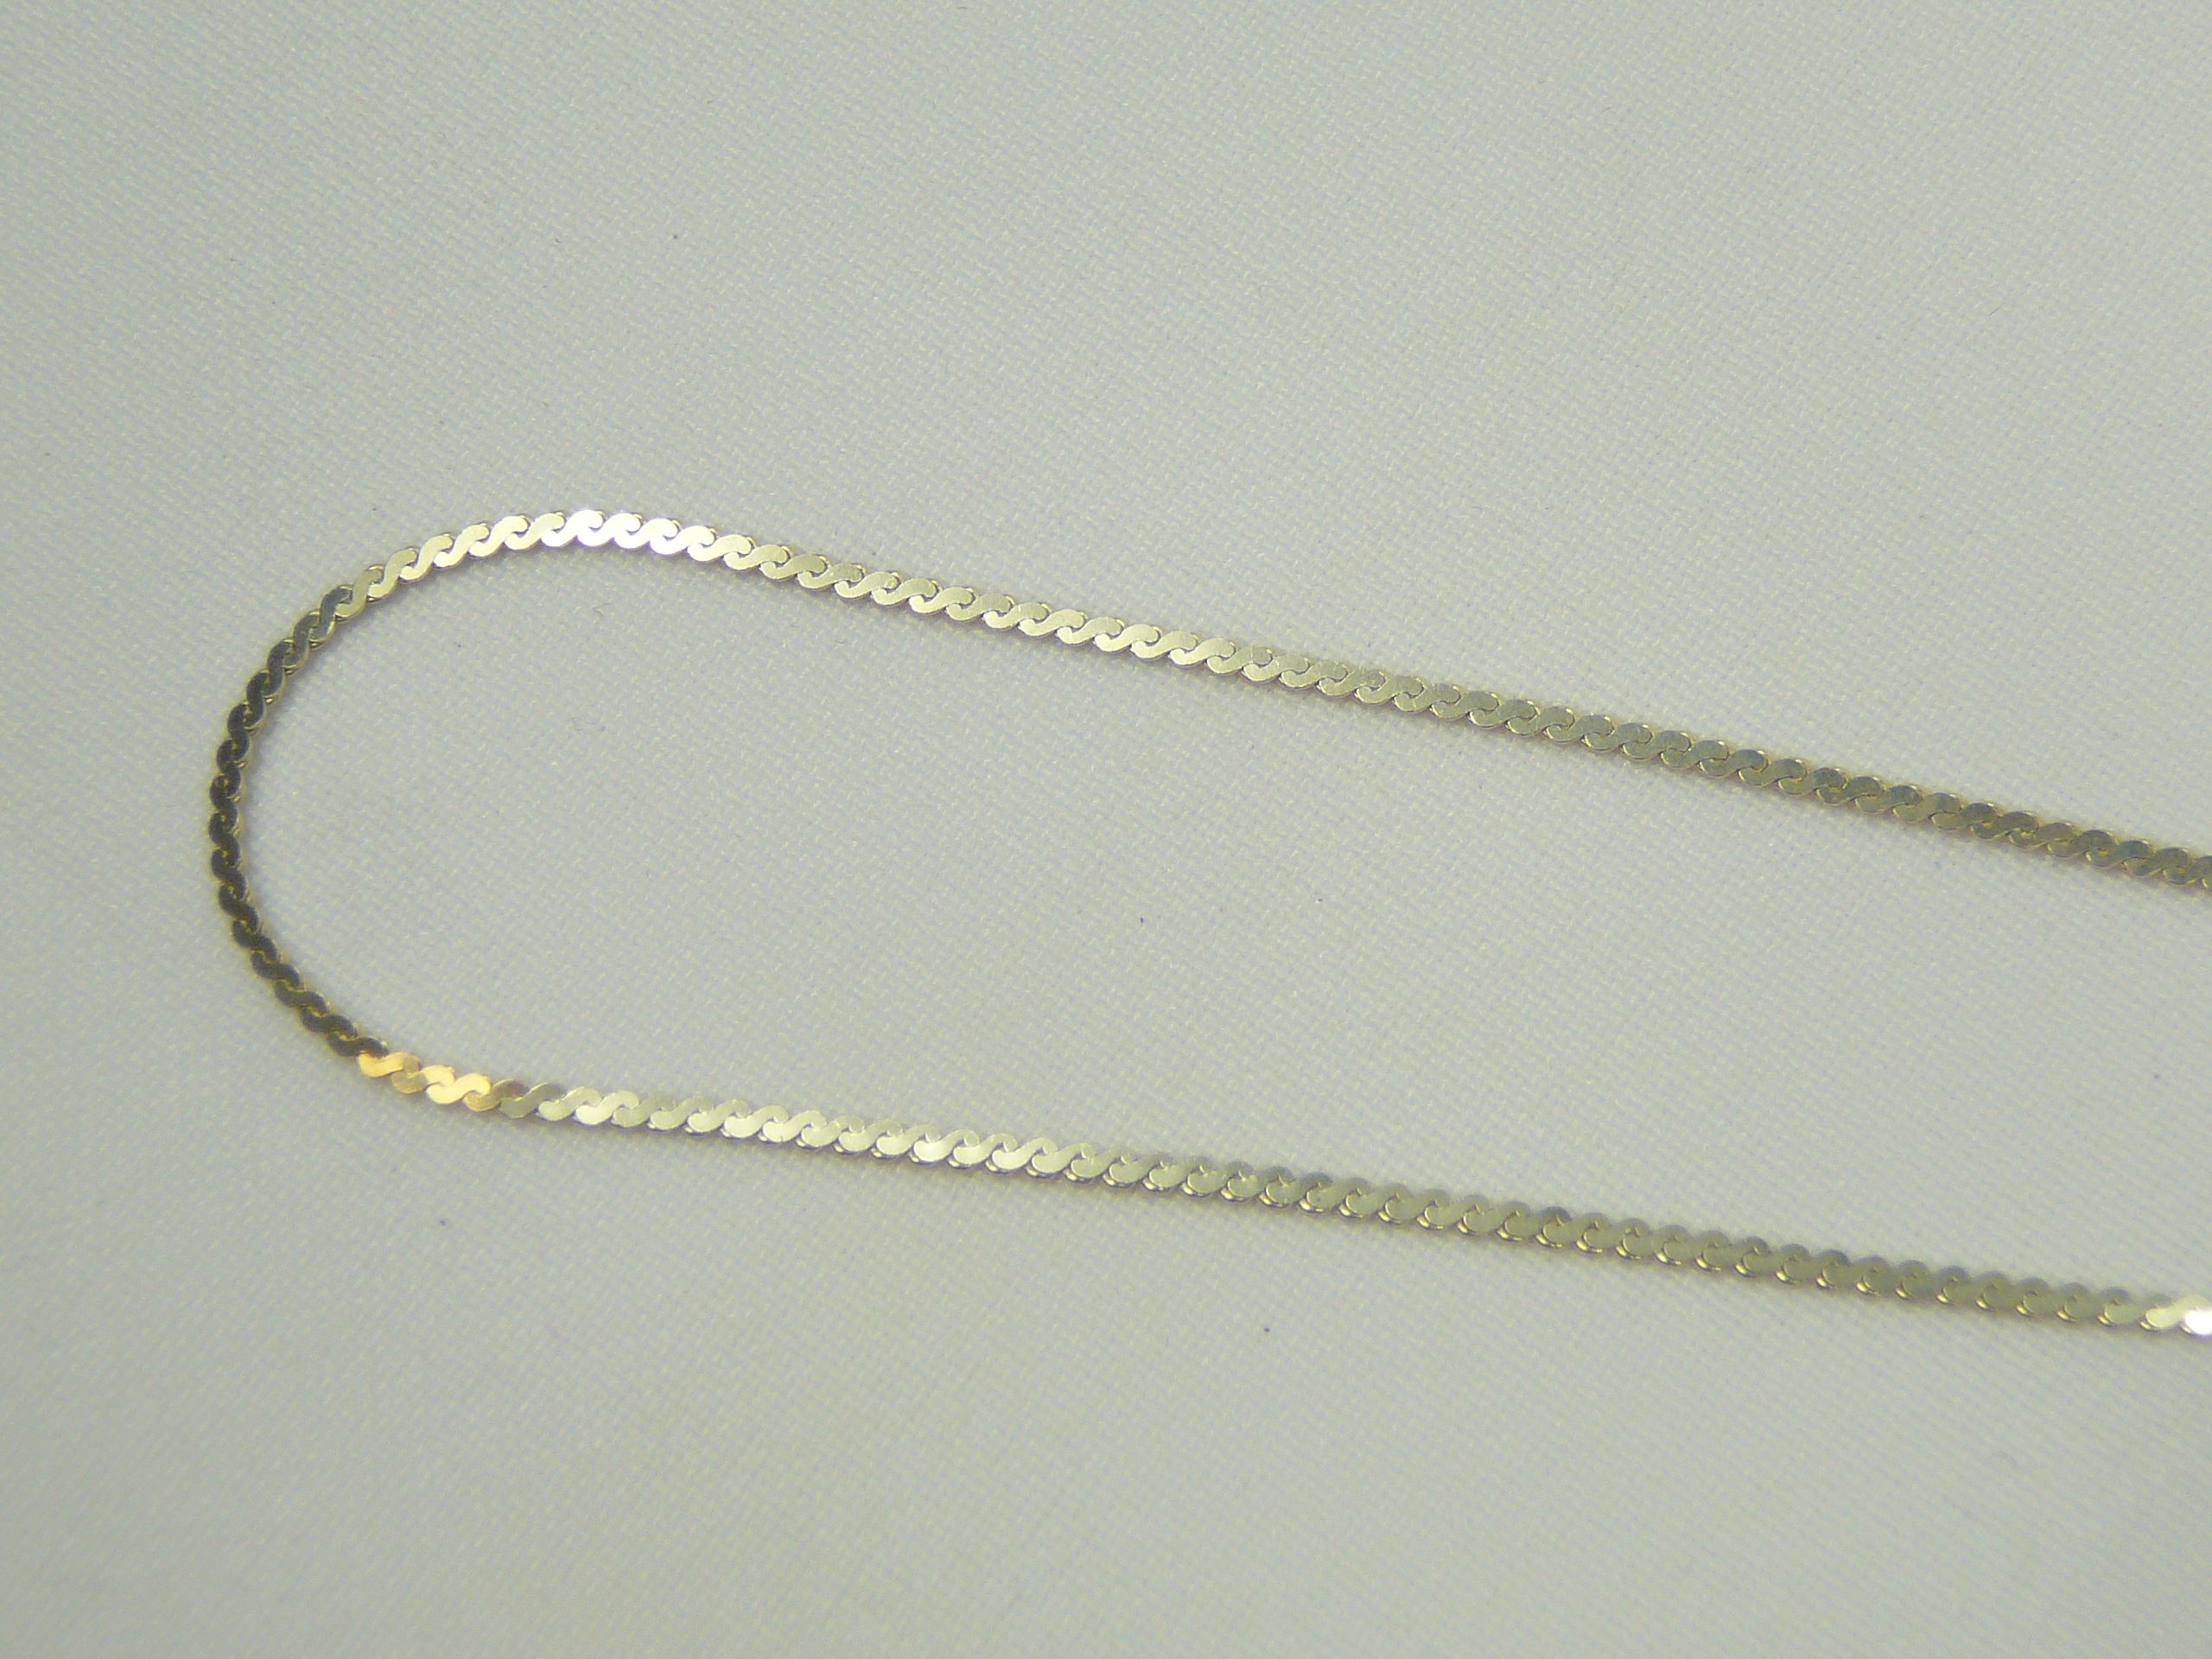 Silver chain - Image 2 of 2